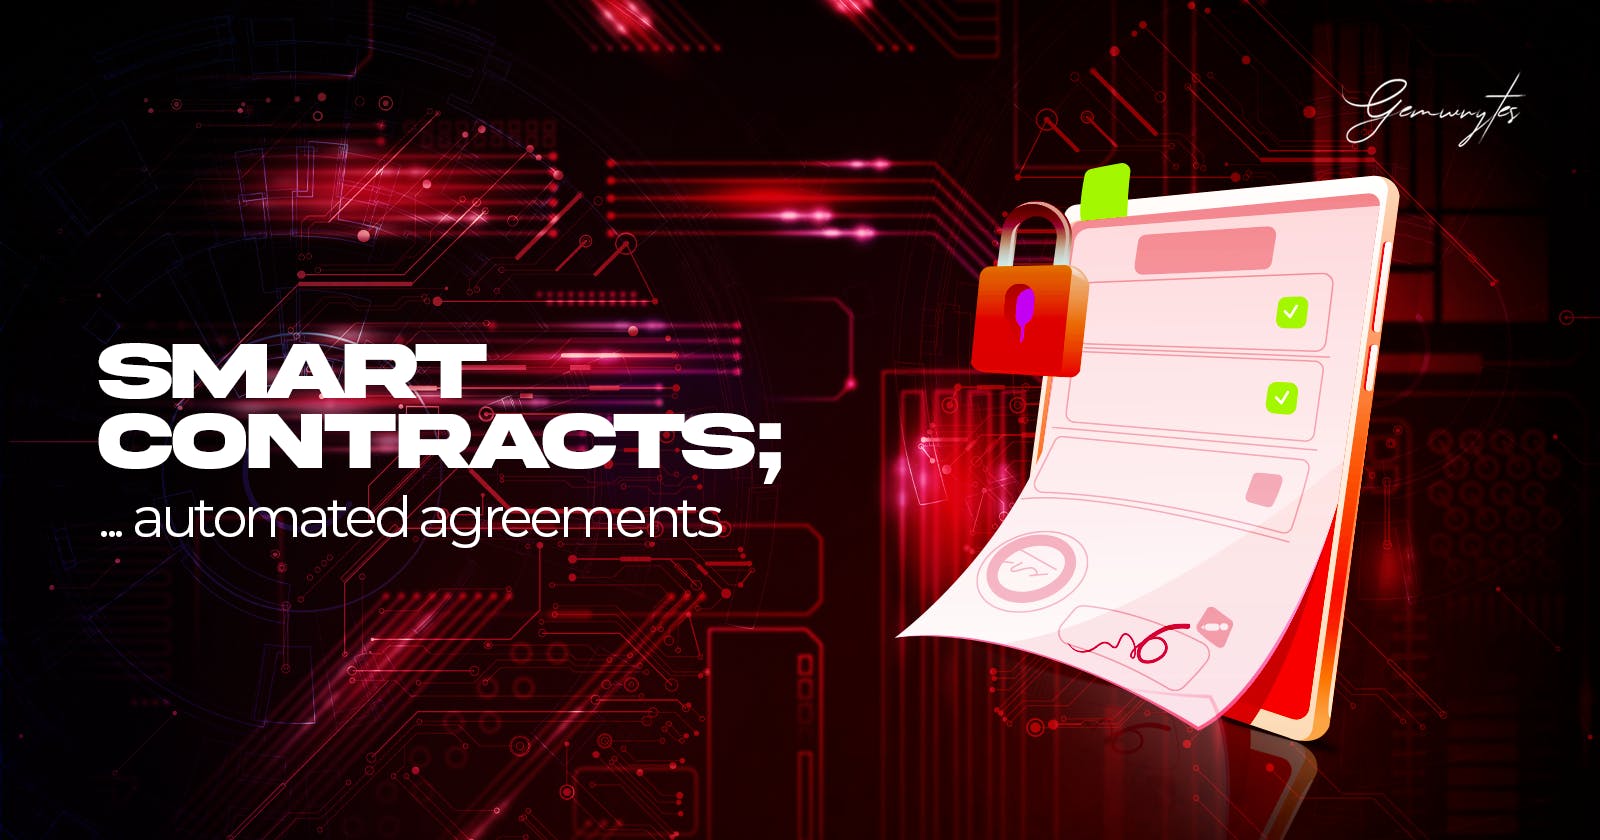 SMART CONTRACTS; Automated agreement